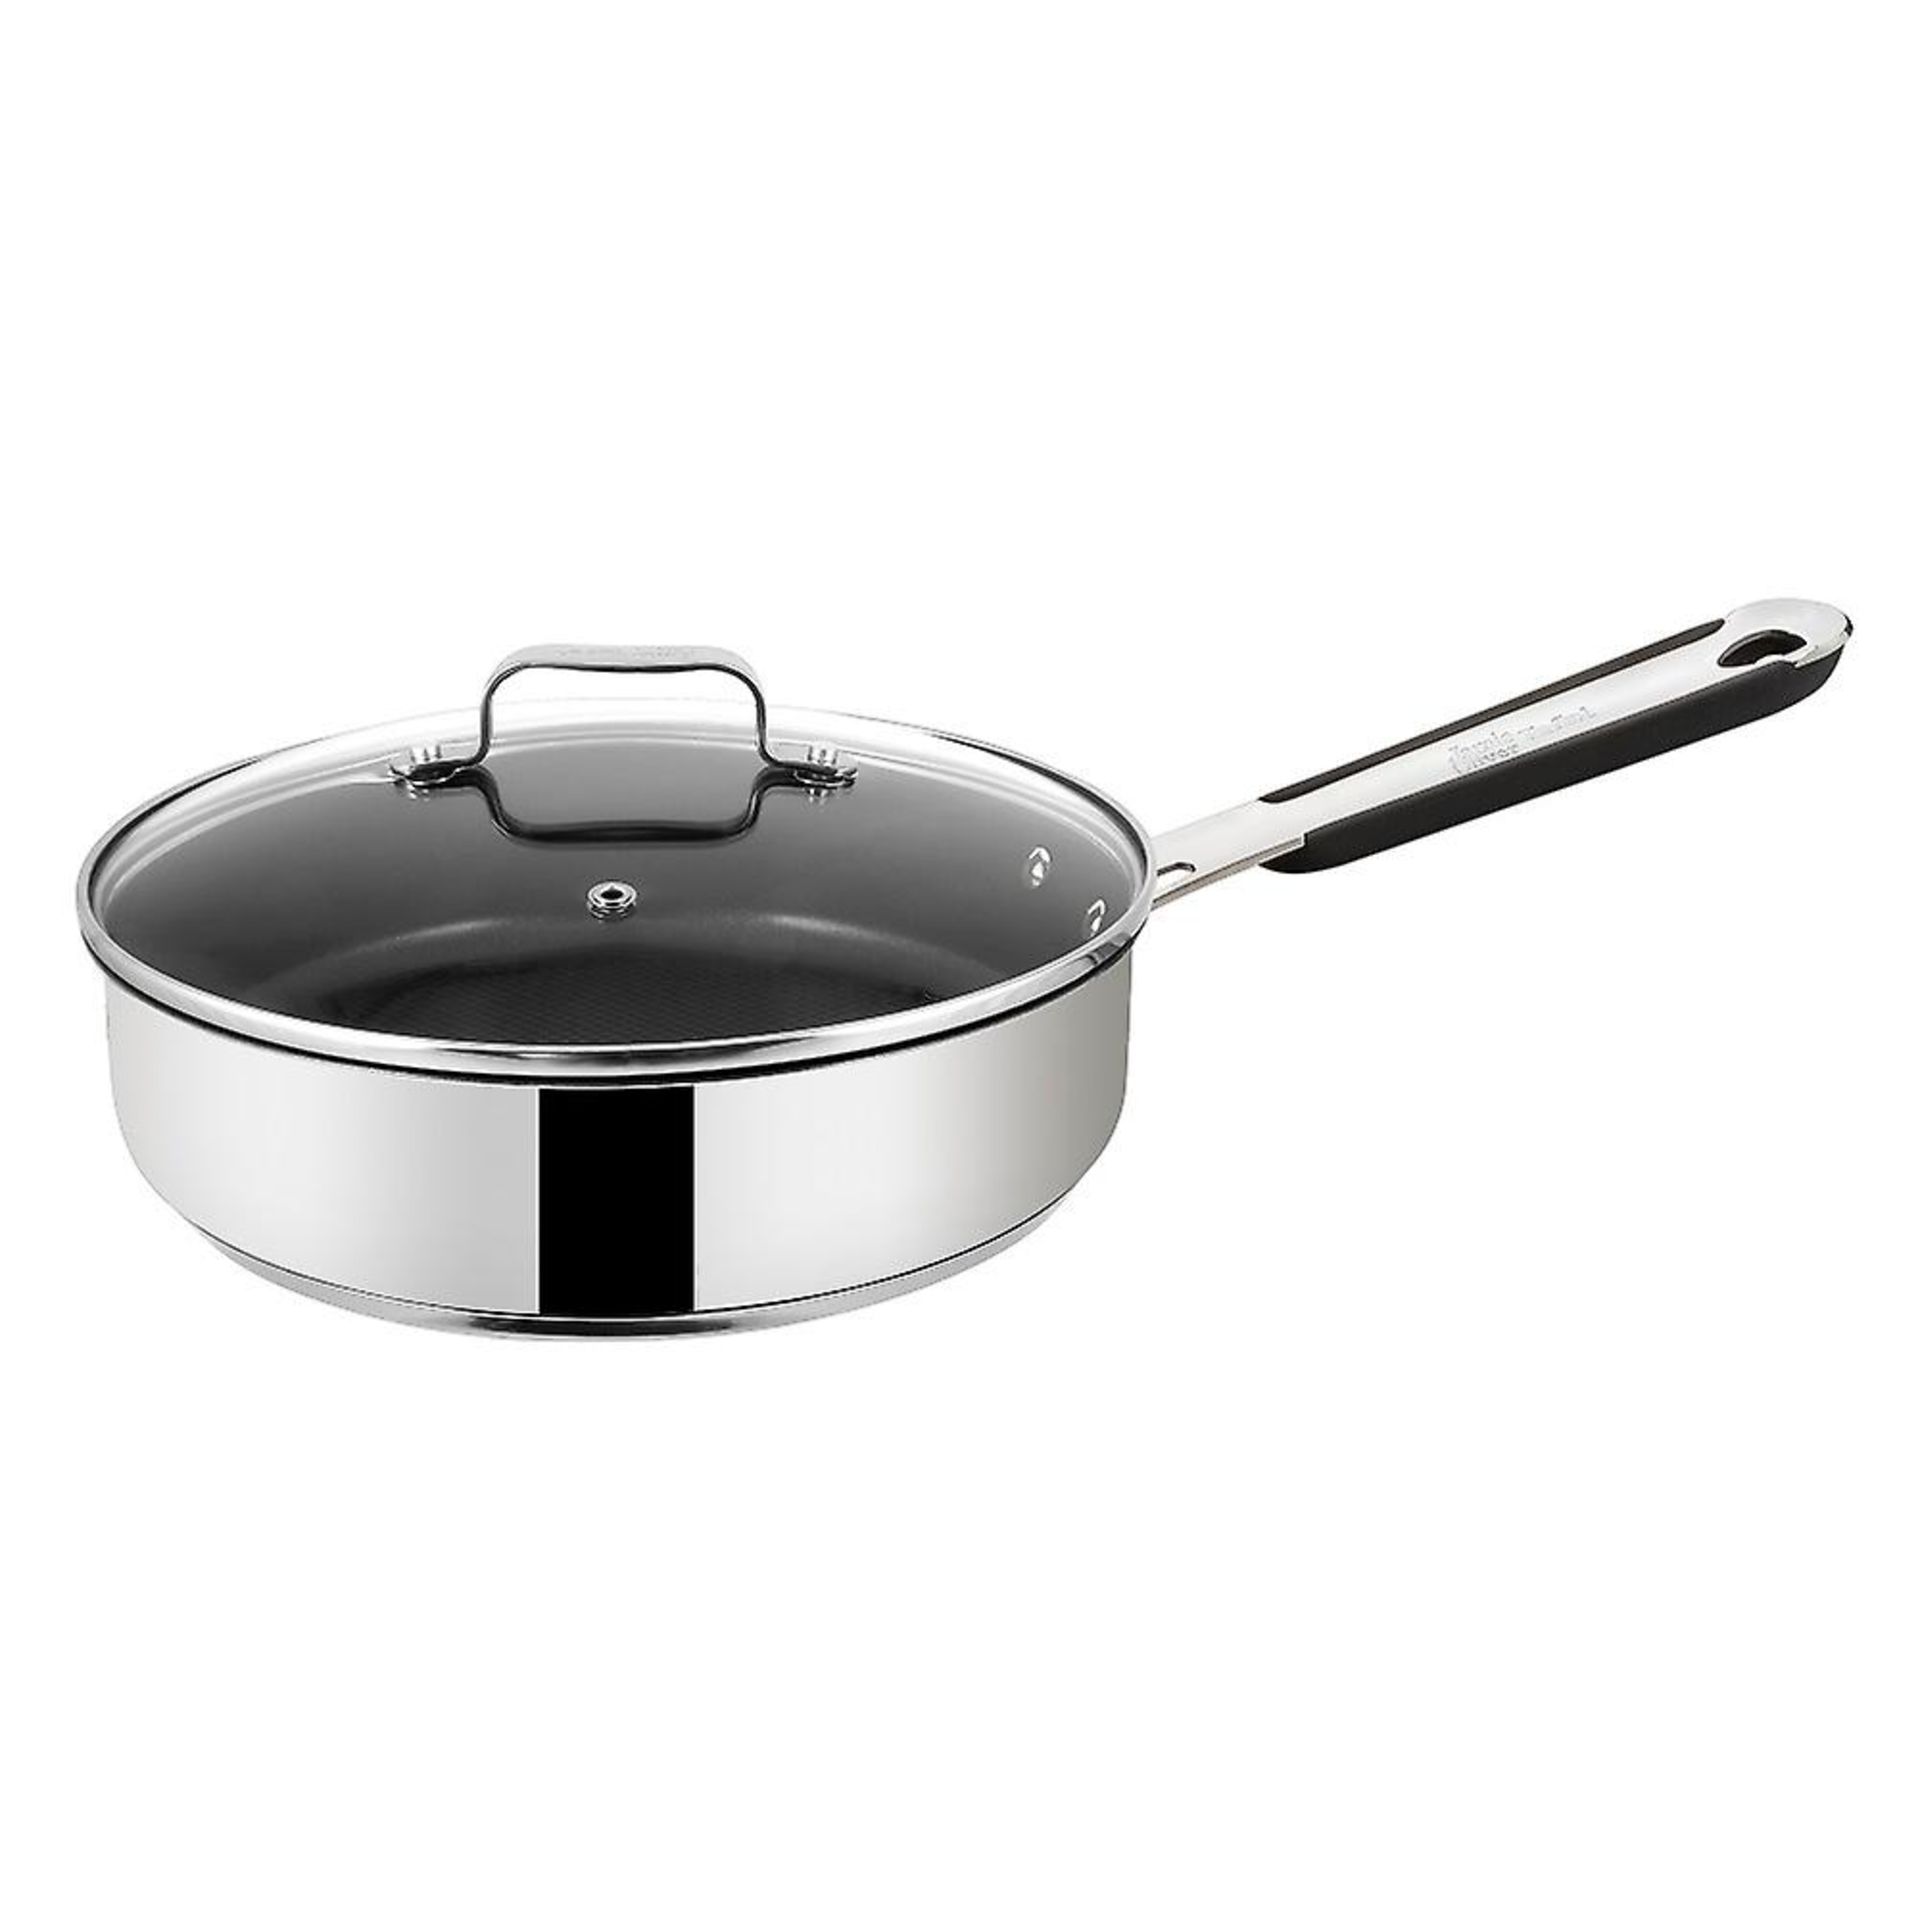 + VAT Brand New Tefal Jamie Oliver Stainless Steel 25cm Saute Pan & Lid - 2.8L - Thermo Spot